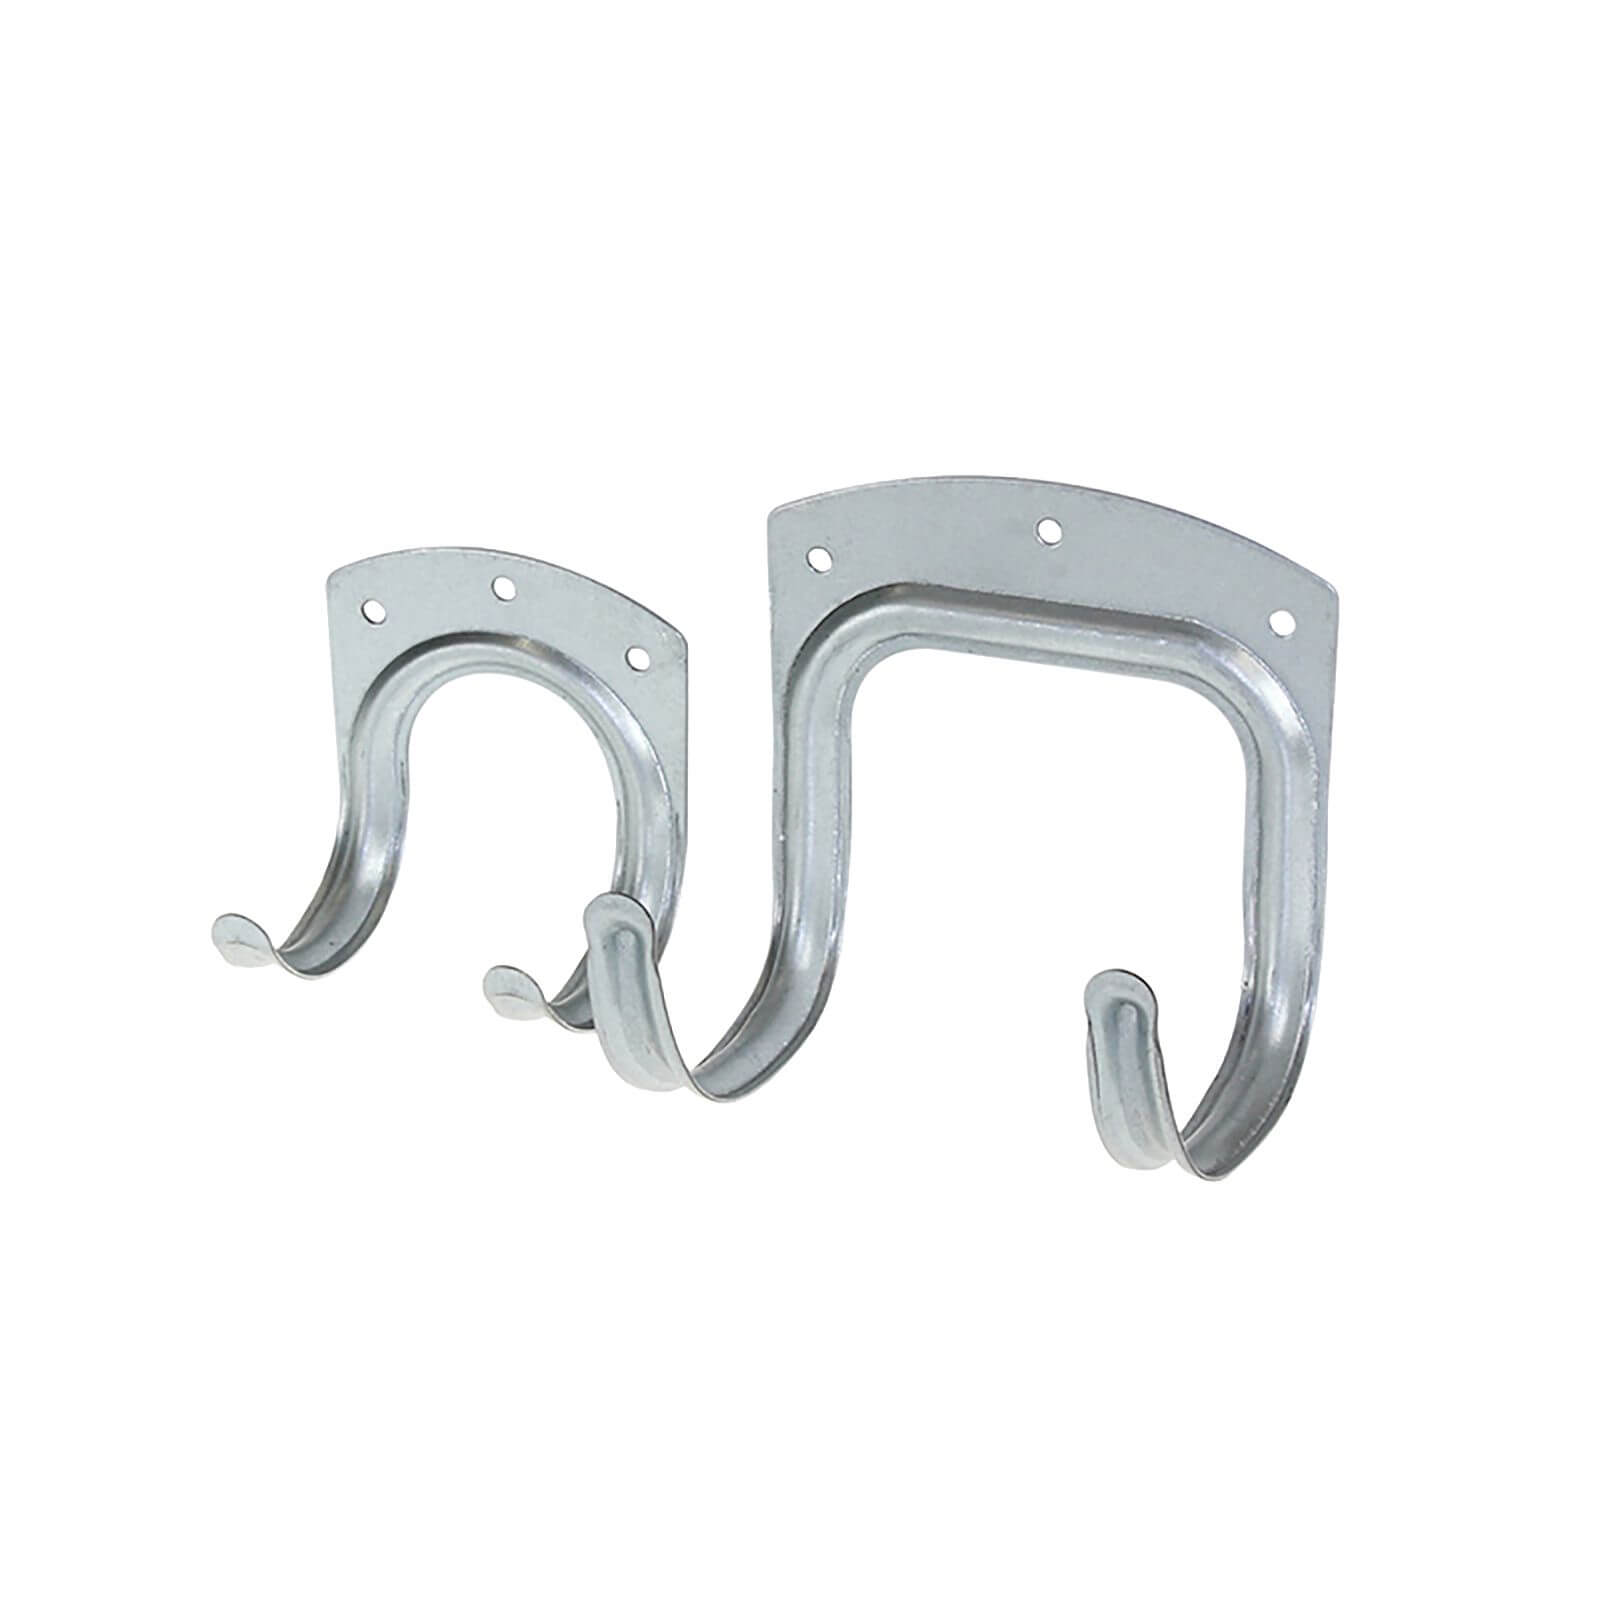 Syneco Utility Hook MultiPack - 8 Pack